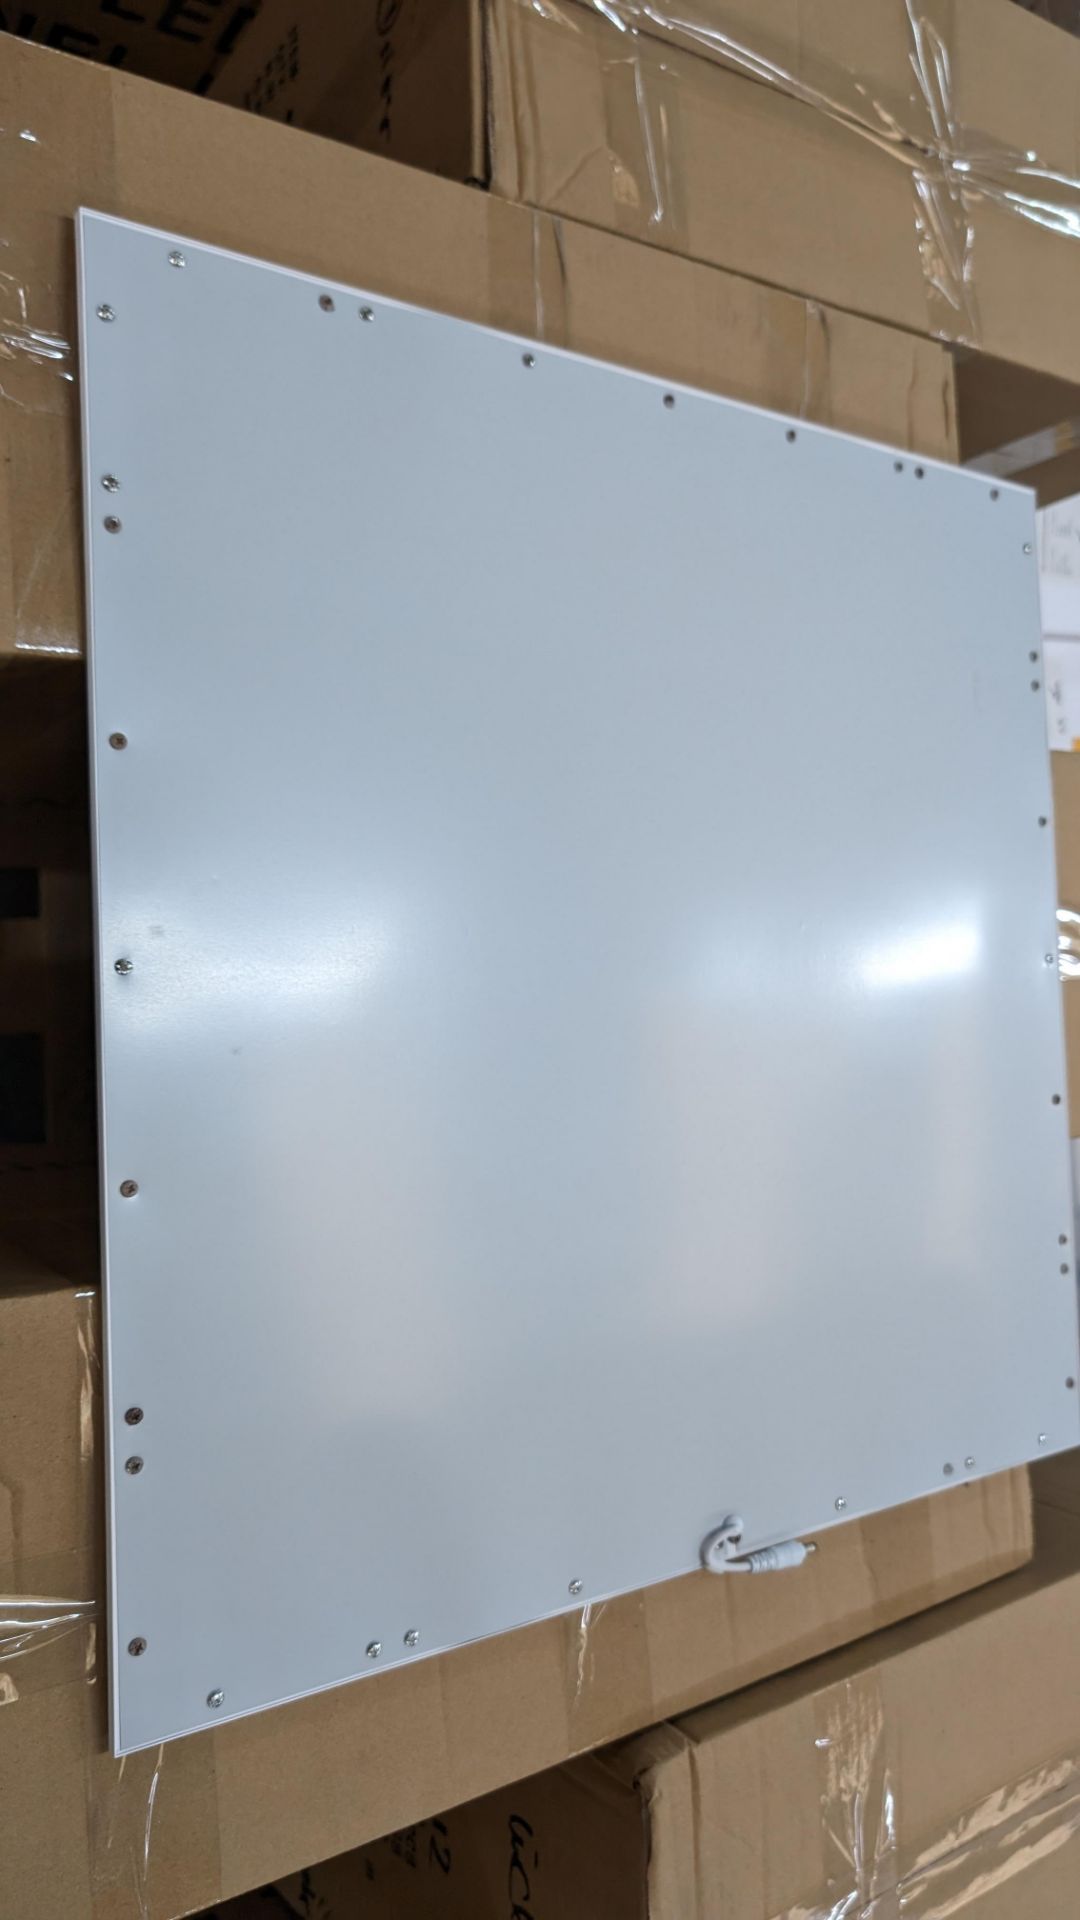 60 off 595mm x 595mm 4000k 45w LED lighting panel, each including driver. This lot comprises 5 cart - Image 6 of 7